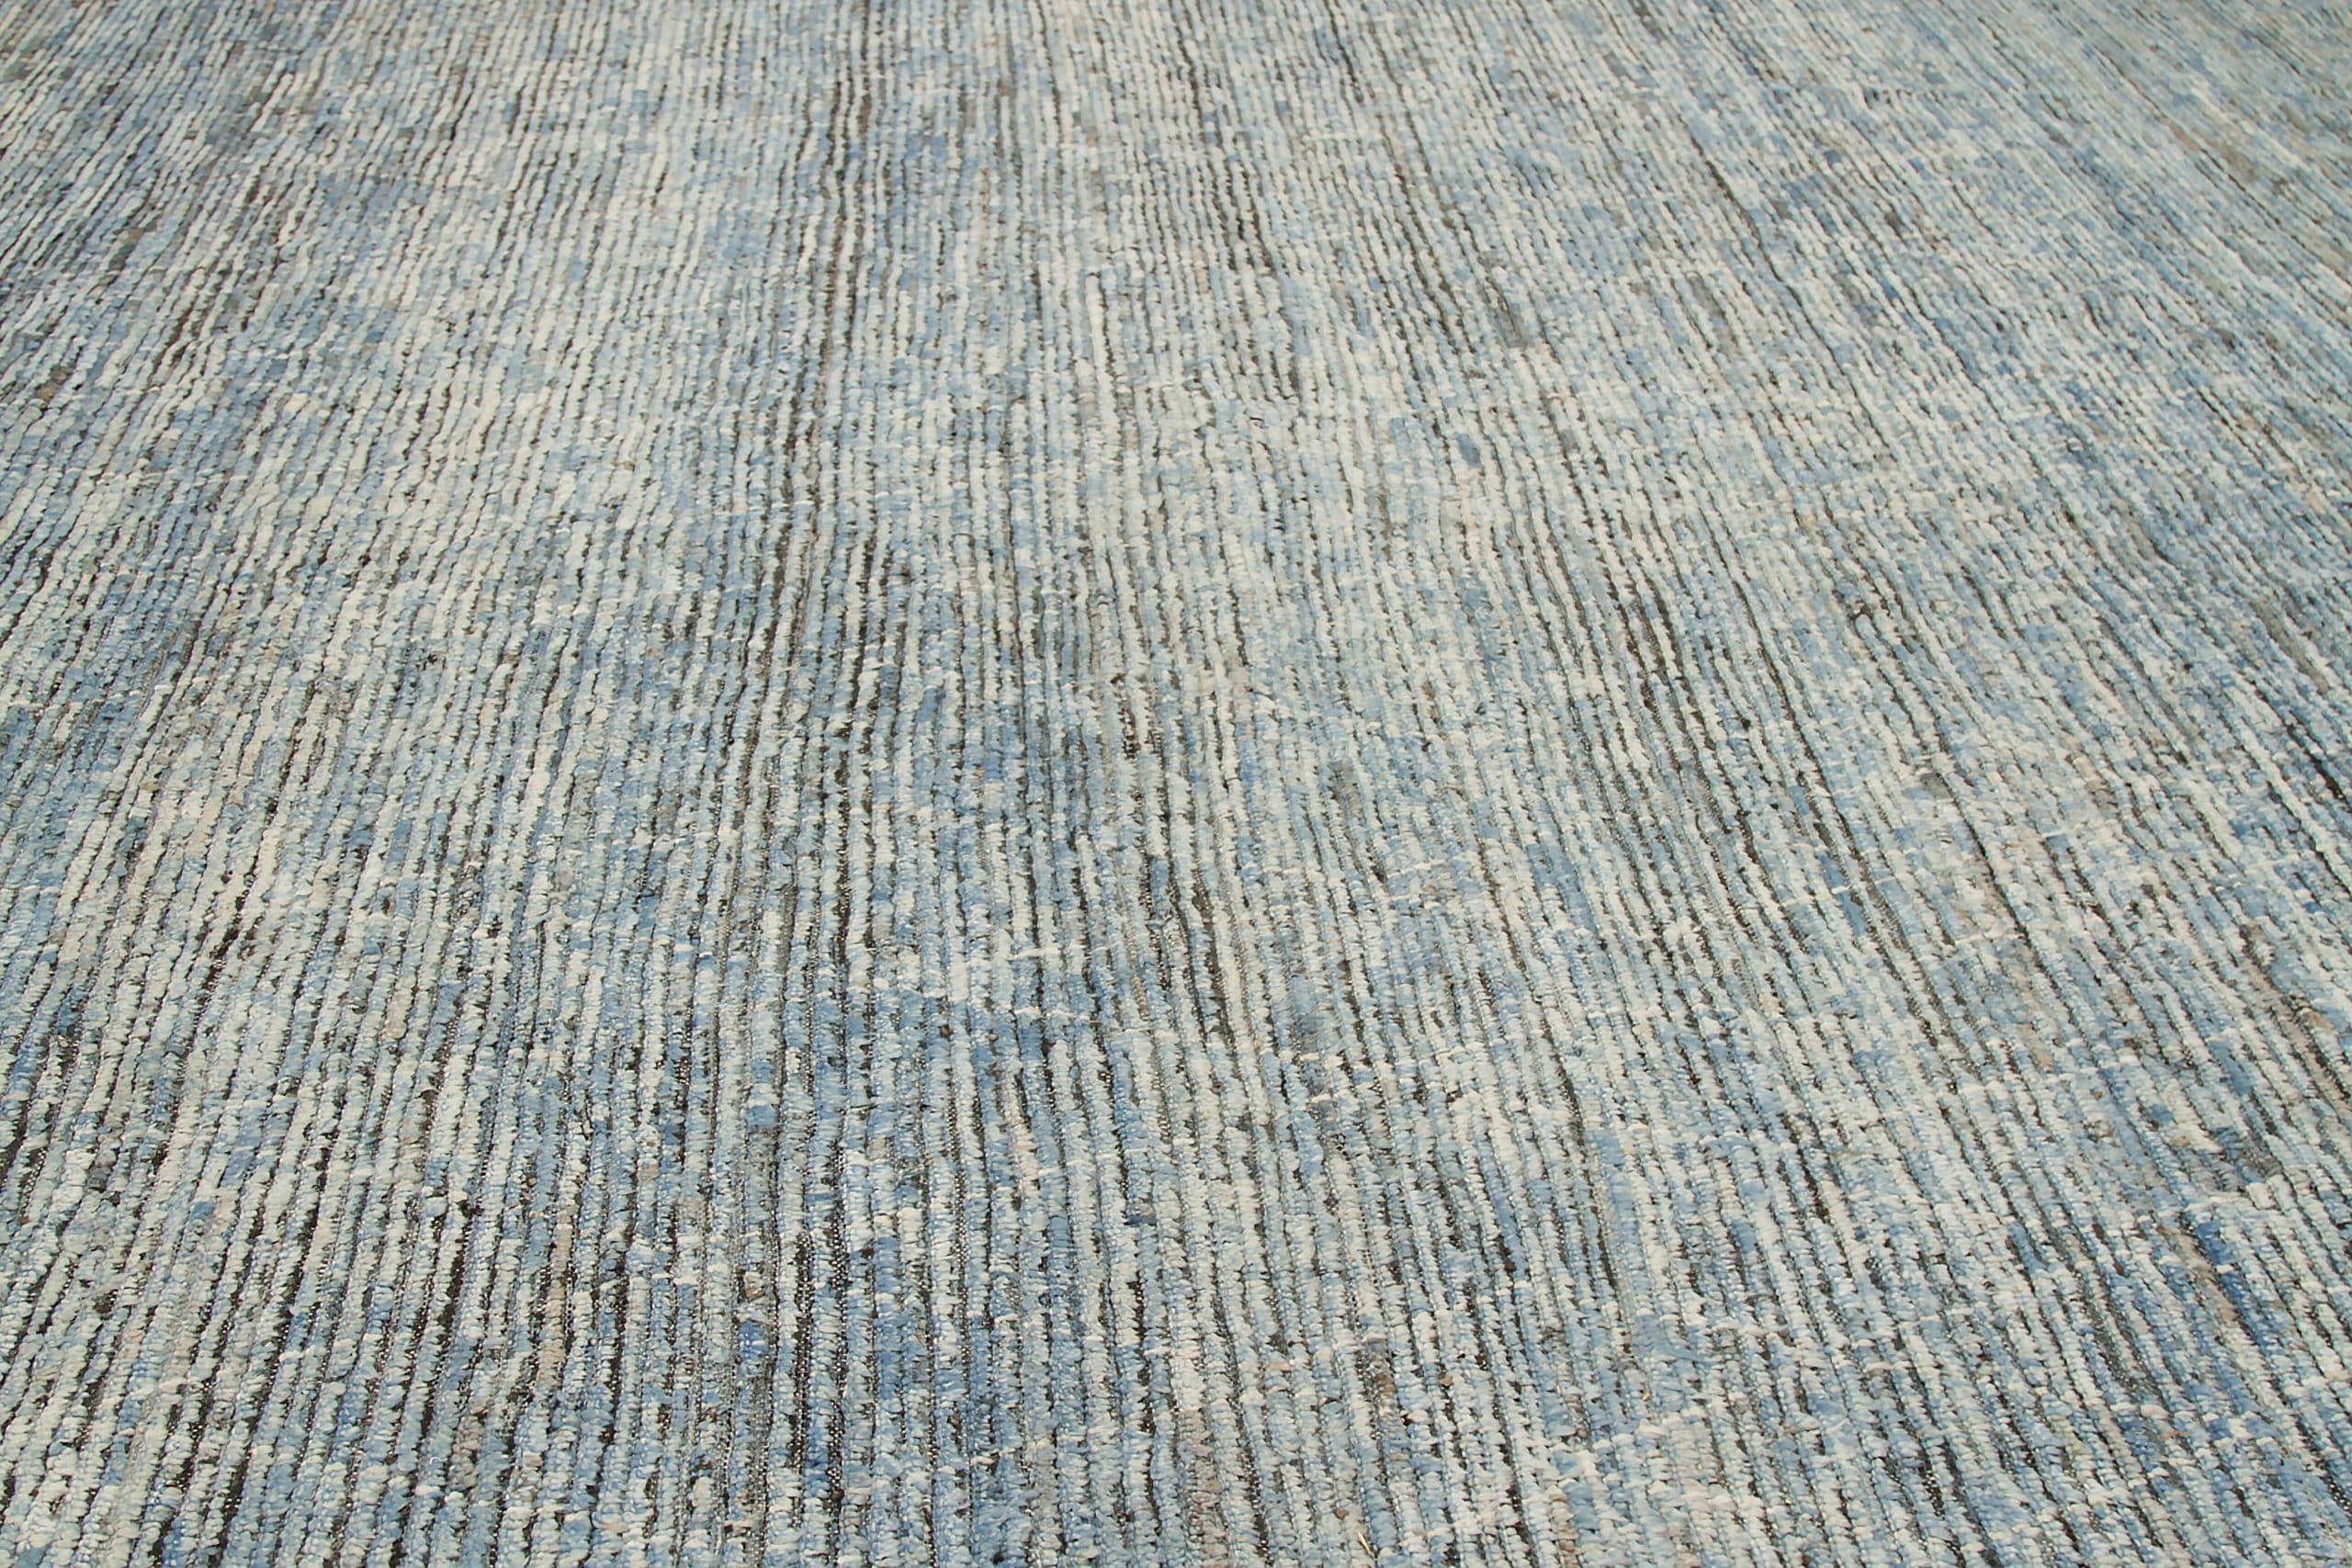 Beautiful Blue Geometric Modern Distressed Rug, Country of Origin: Afghanistan, Circa date: Modern. Size: 13 ft 11 in x 18 ft 9 in (4.24 m x 5.71m)
 